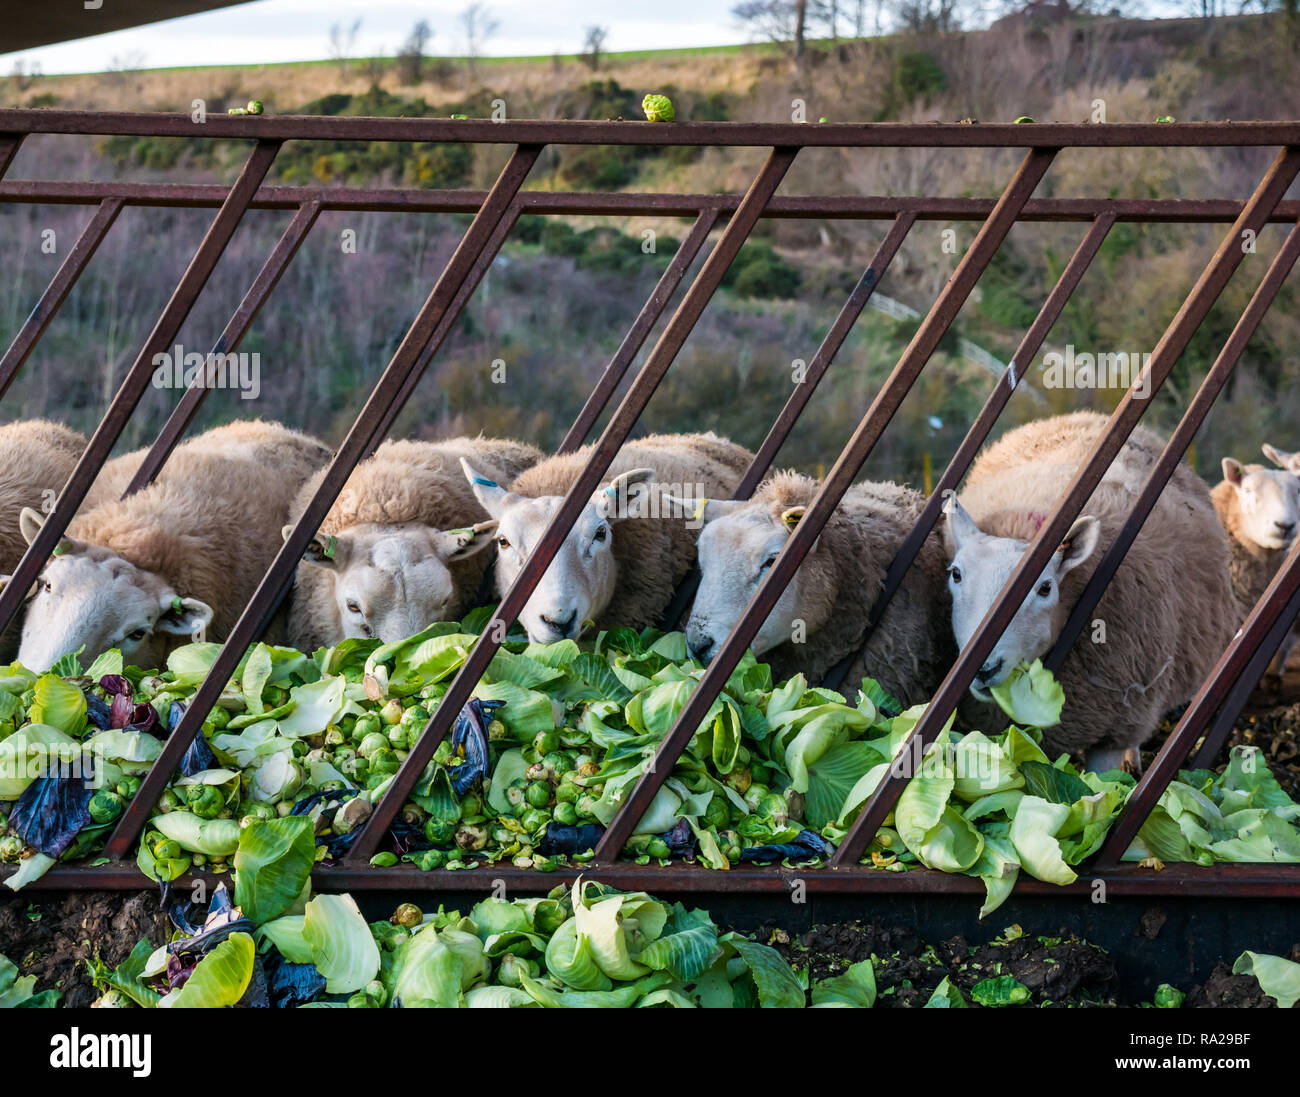 Close up of sheep eating Brussels sprouts and cabbage leaves in grate, East Lothian, Scotland, UK Stock Photo